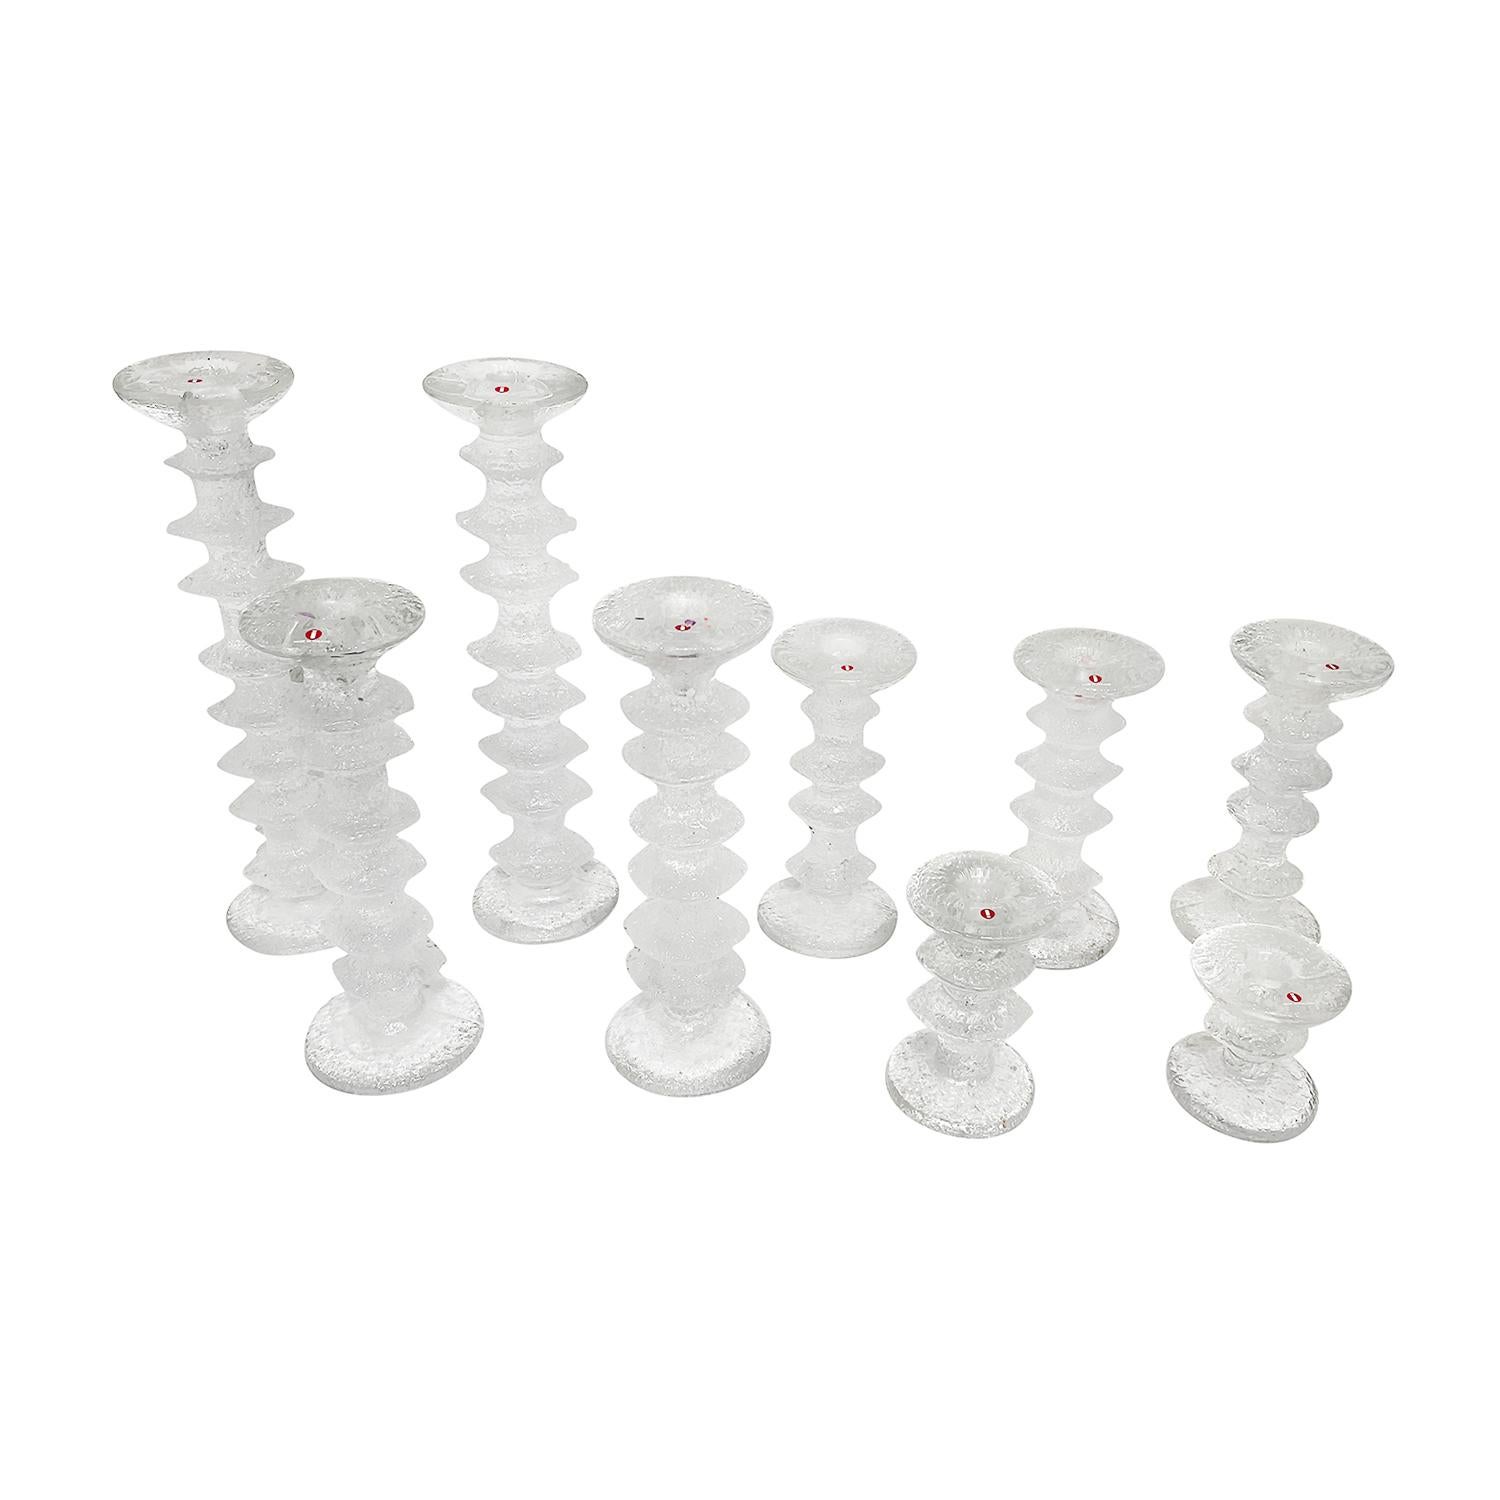 A slightly smoked, vintage Mid-Century Modern finnish set of nine Ljusstakar, candlesticks with the original box, made of hand blown molded glass, designed by Timo Sarpaneva and produced by Festivo - Iittala, in good condition. The vintage candle